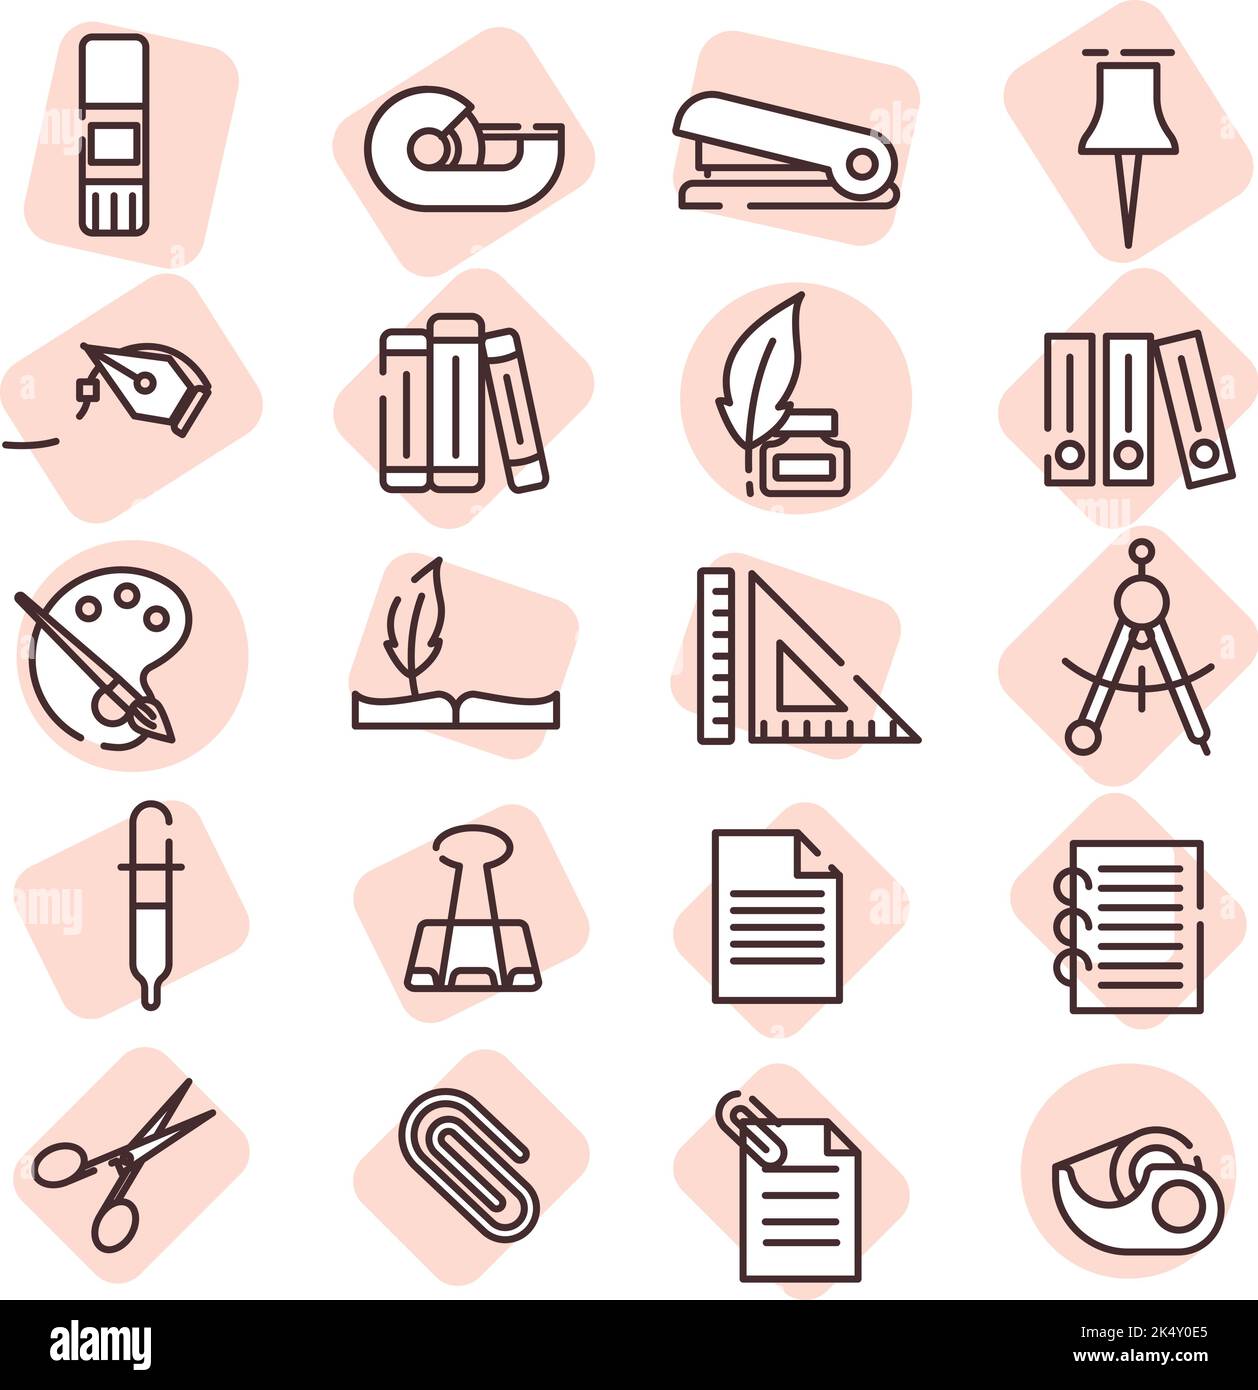 Stationery equipment, illustration, vector on a white background. Stock Vector